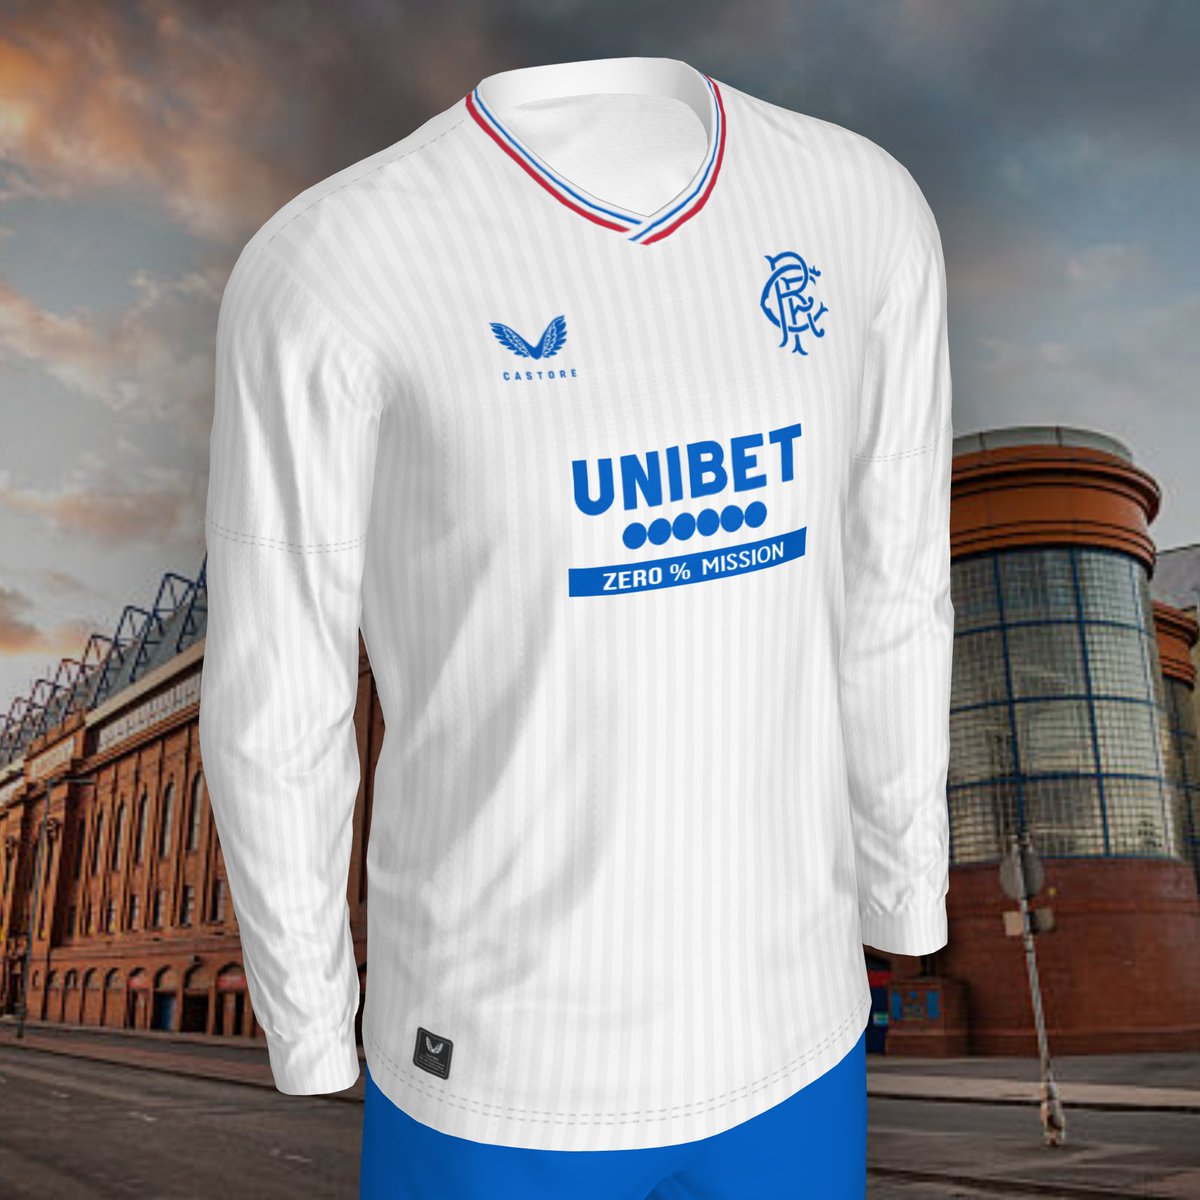 Concept Rangers Kits on X: Rangers 23/24 Home Kit design in red